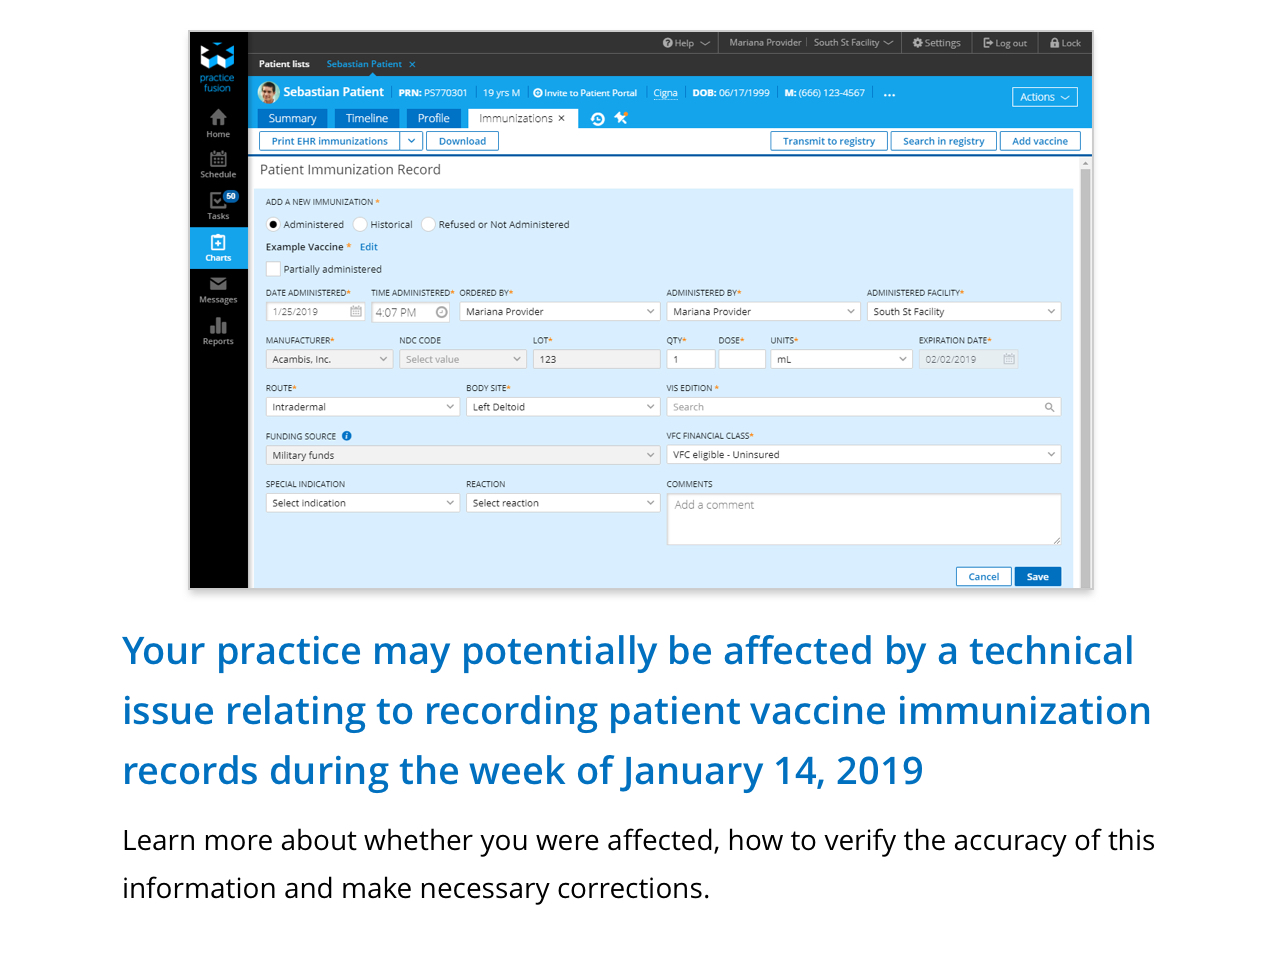 Your practice may potentially be affected by a technical issue relating to recording patient vaccine immunization records during the week of january 14, 2019